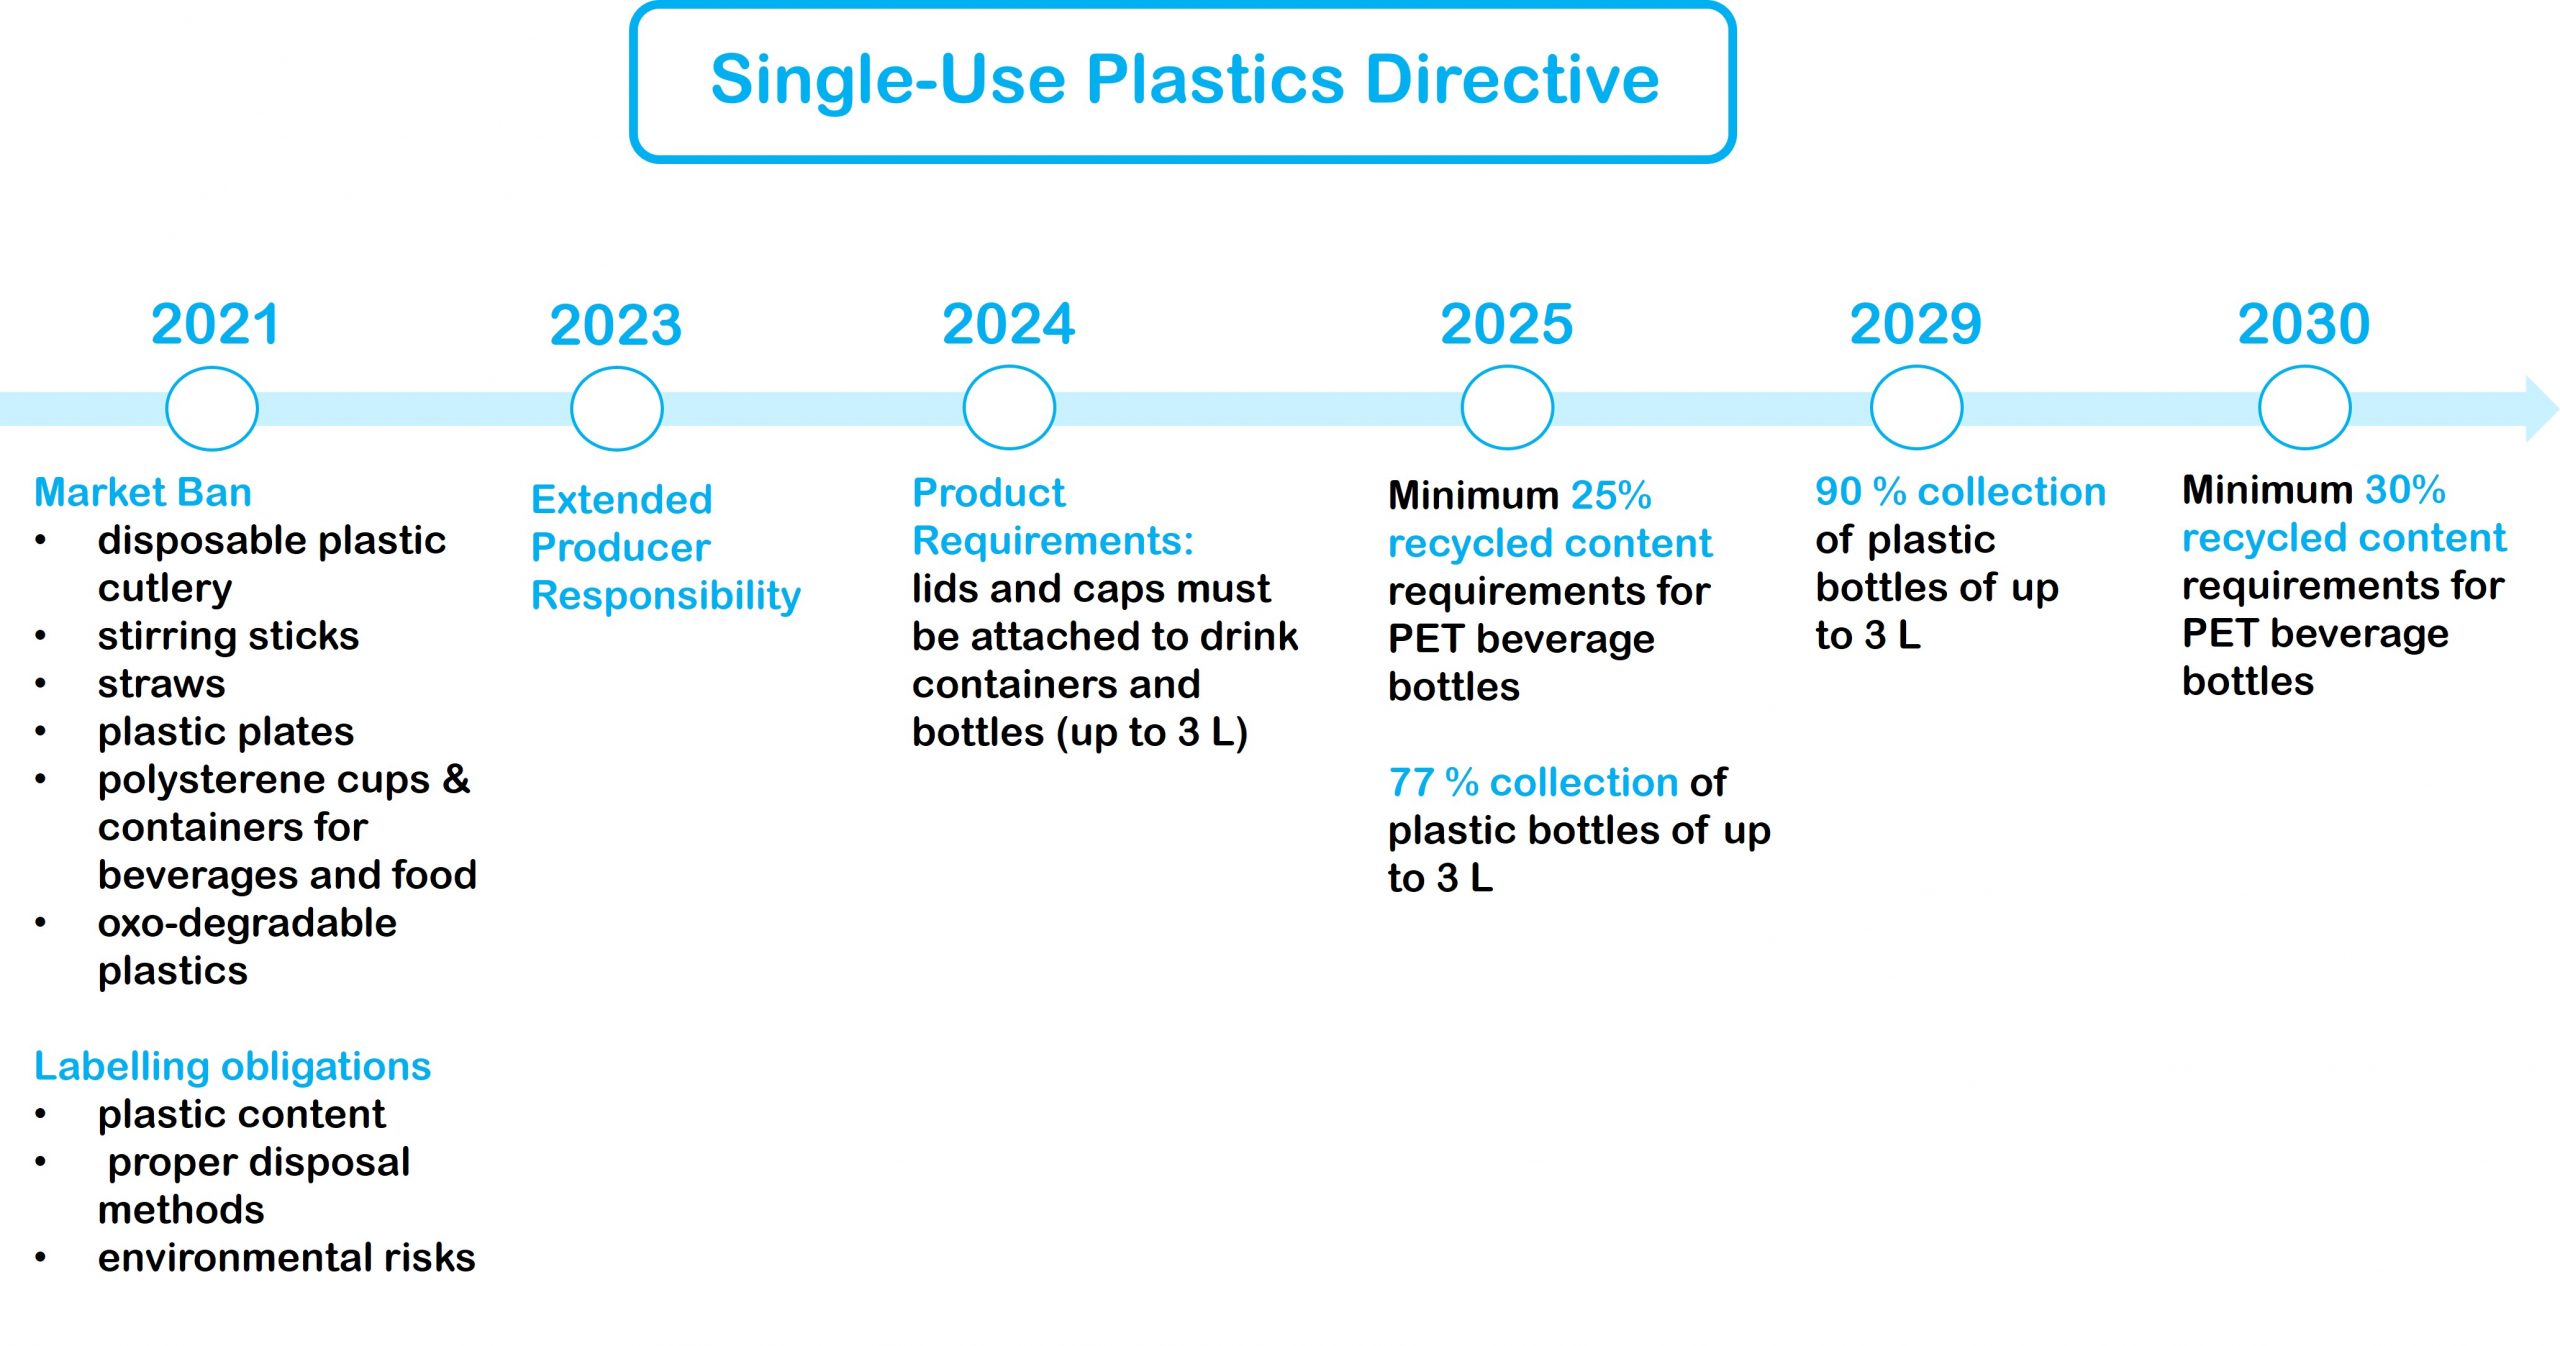 Timeline for implementation of the Single-Use Plastic Directive. 